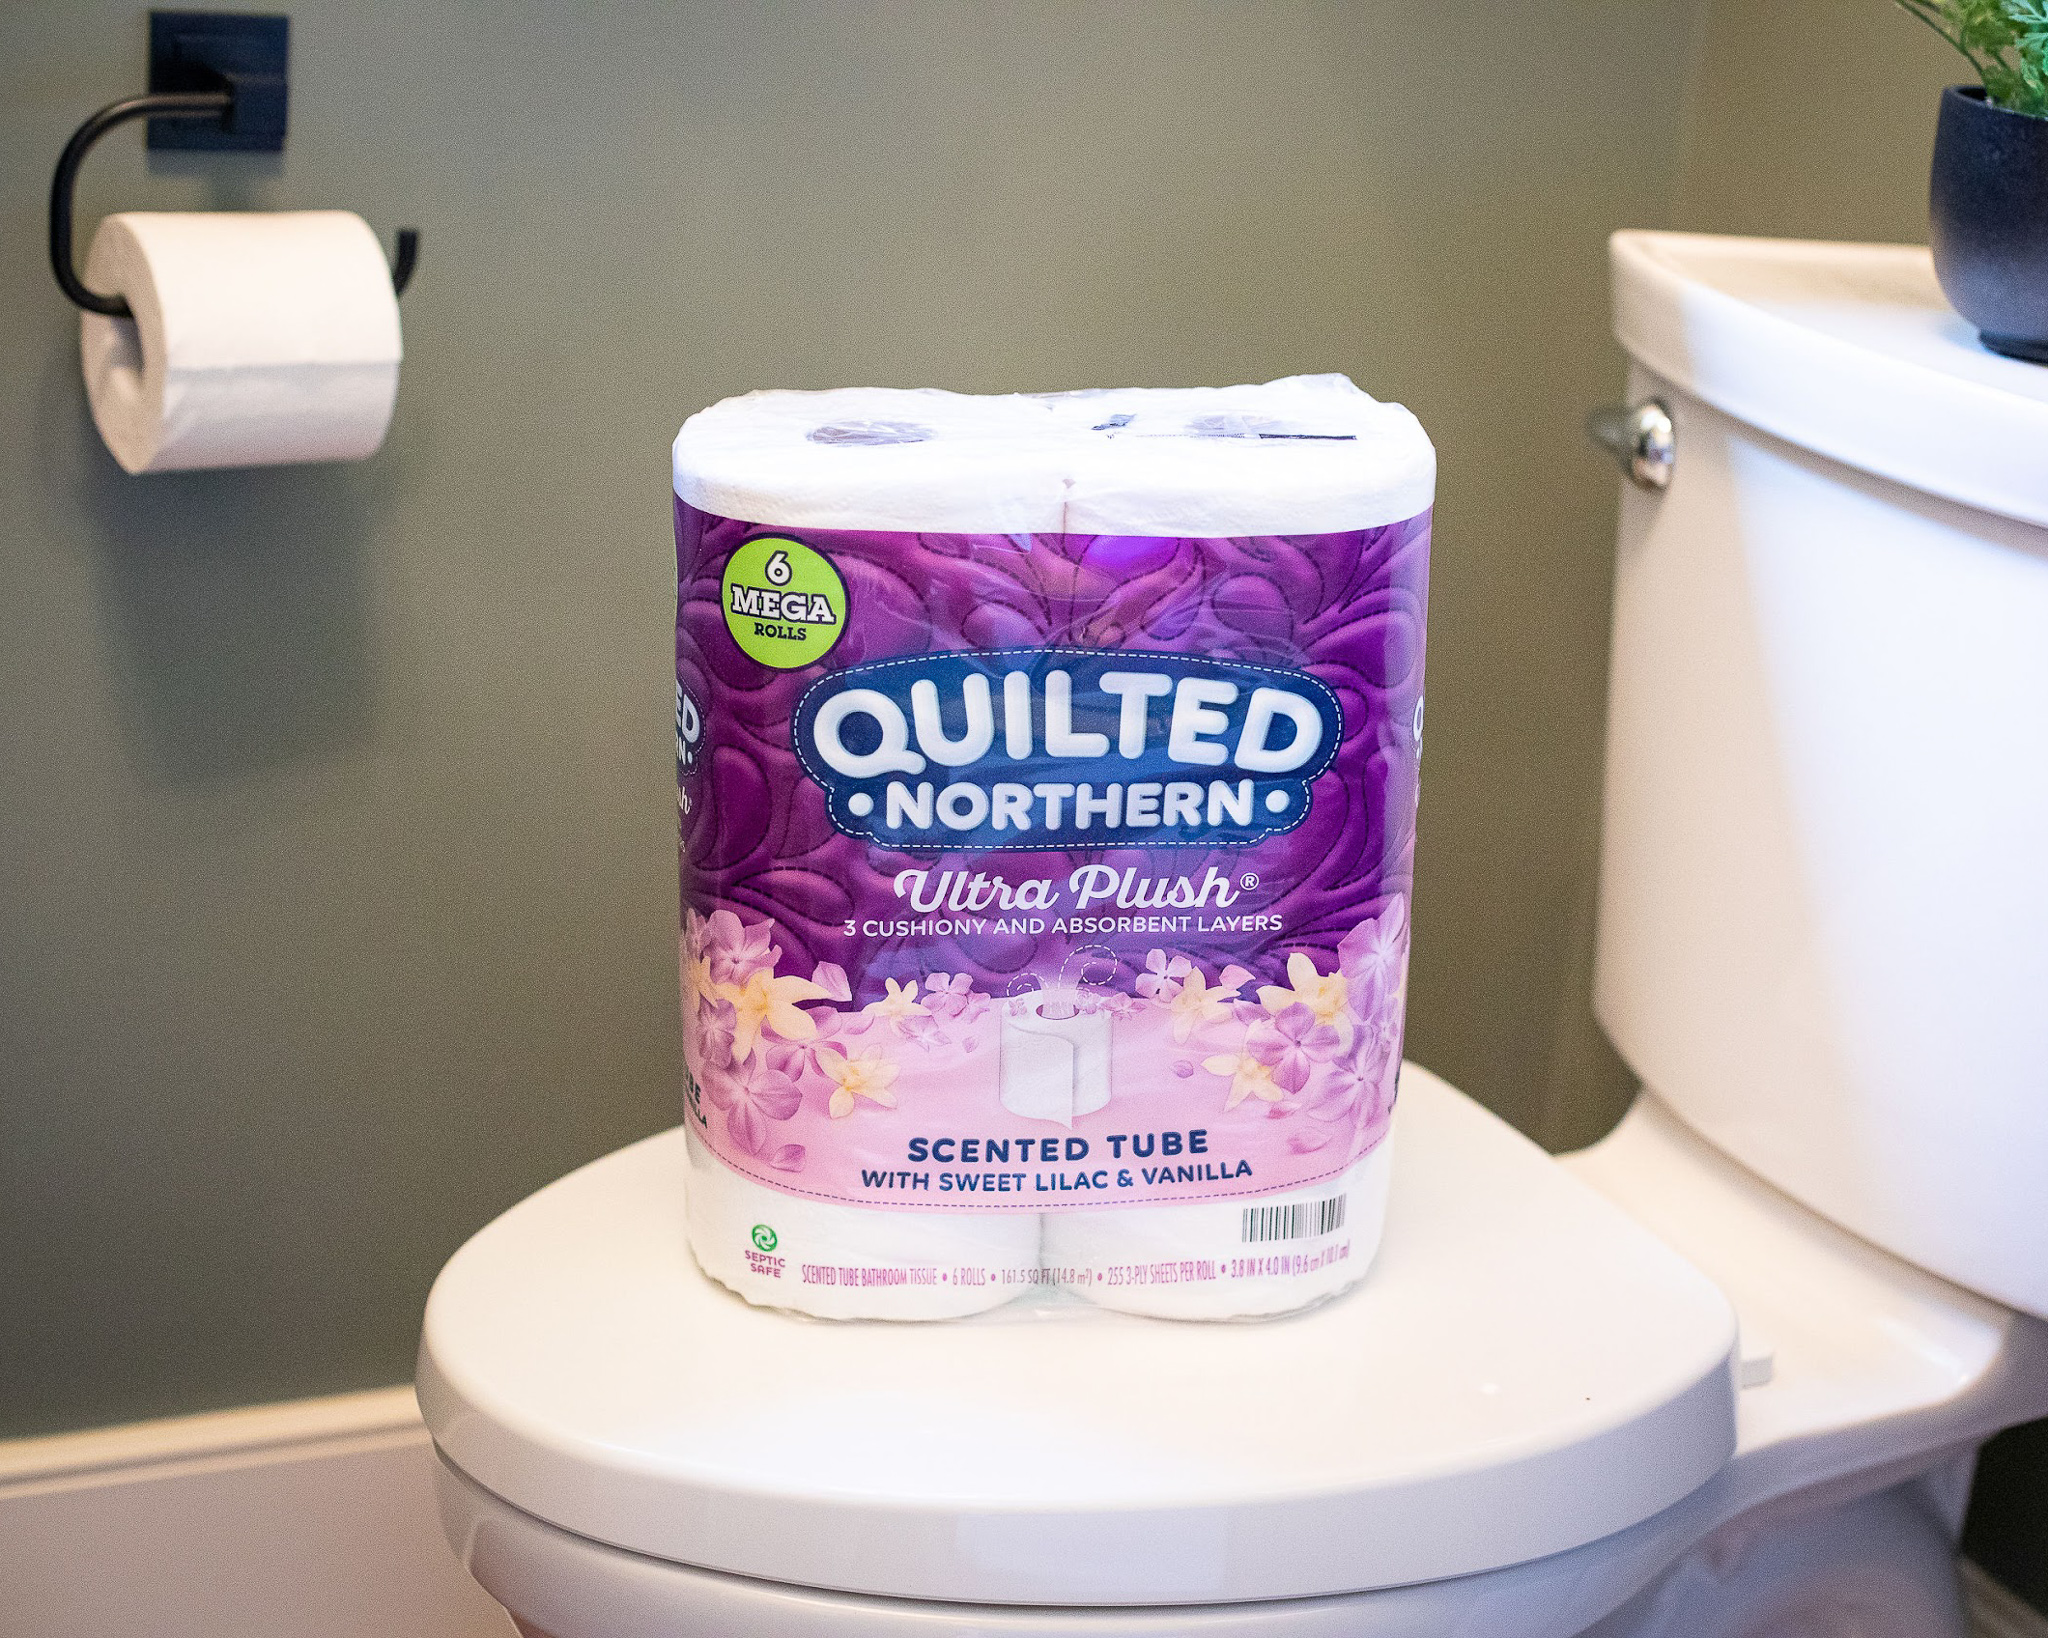 Quilted Northern Bath Tissue Just $4.99 At Kroger